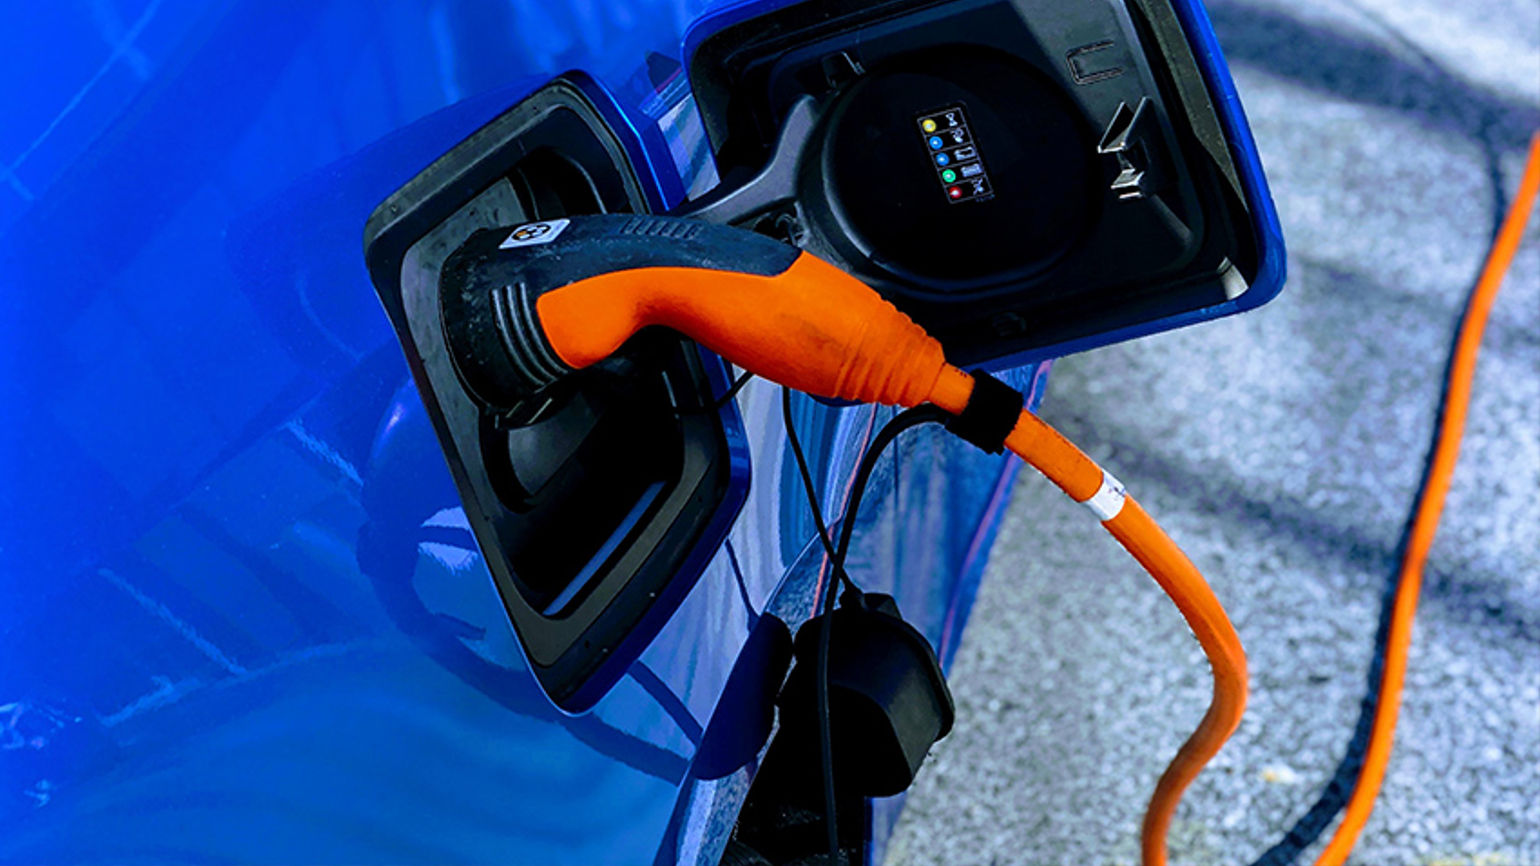 €300m boost for Germany’s electric charging network